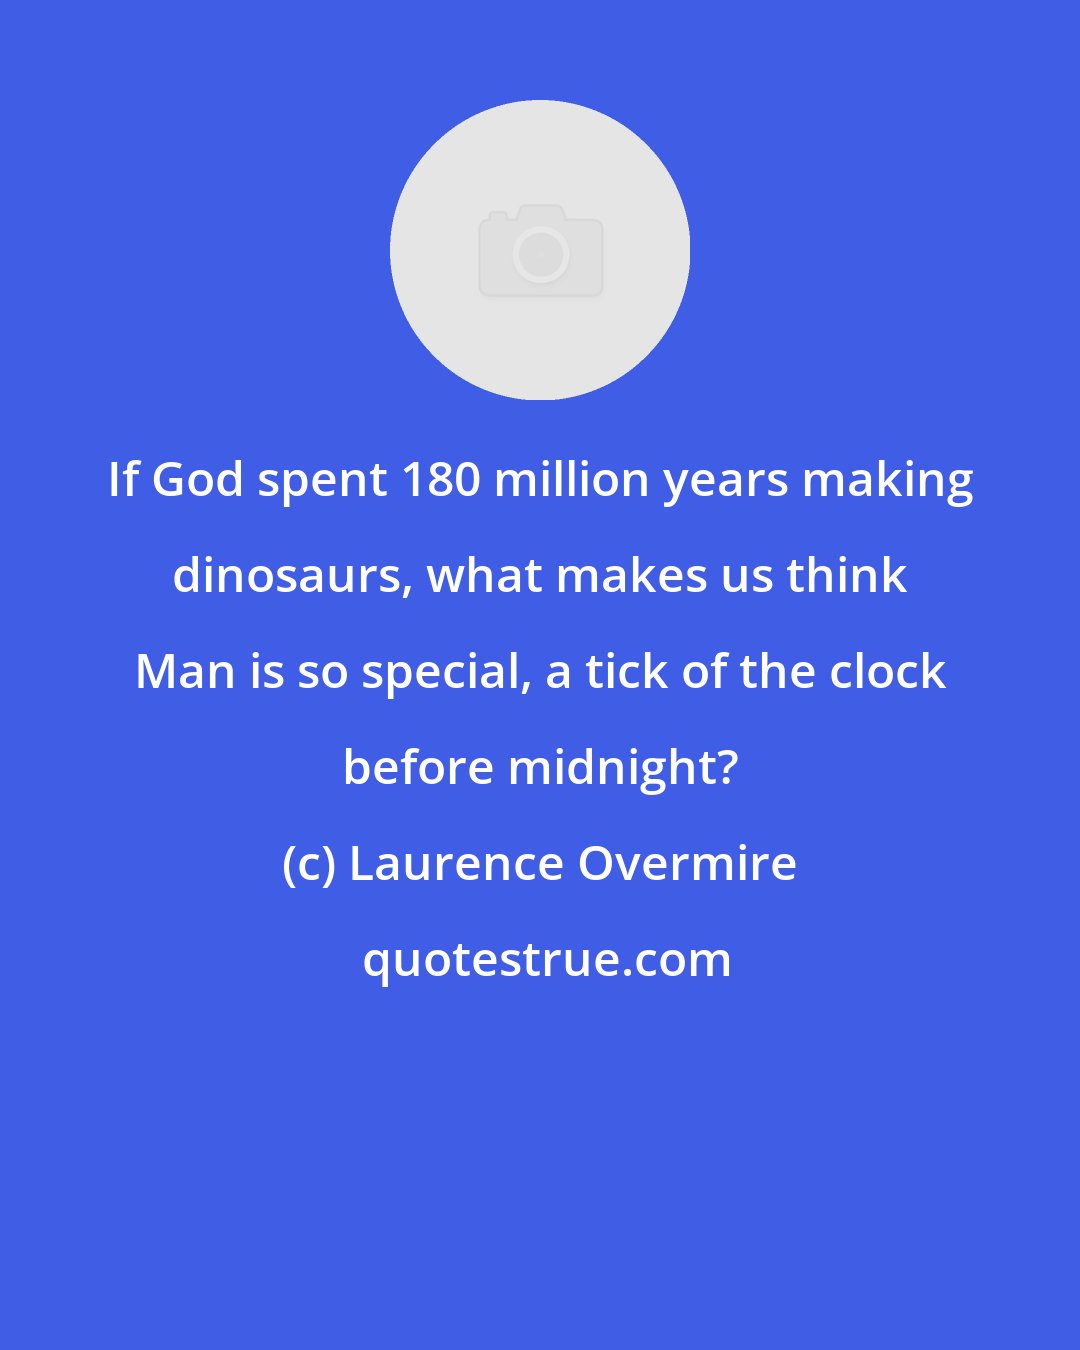 Laurence Overmire: If God spent 180 million years making dinosaurs, what makes us think Man is so special, a tick of the clock before midnight?